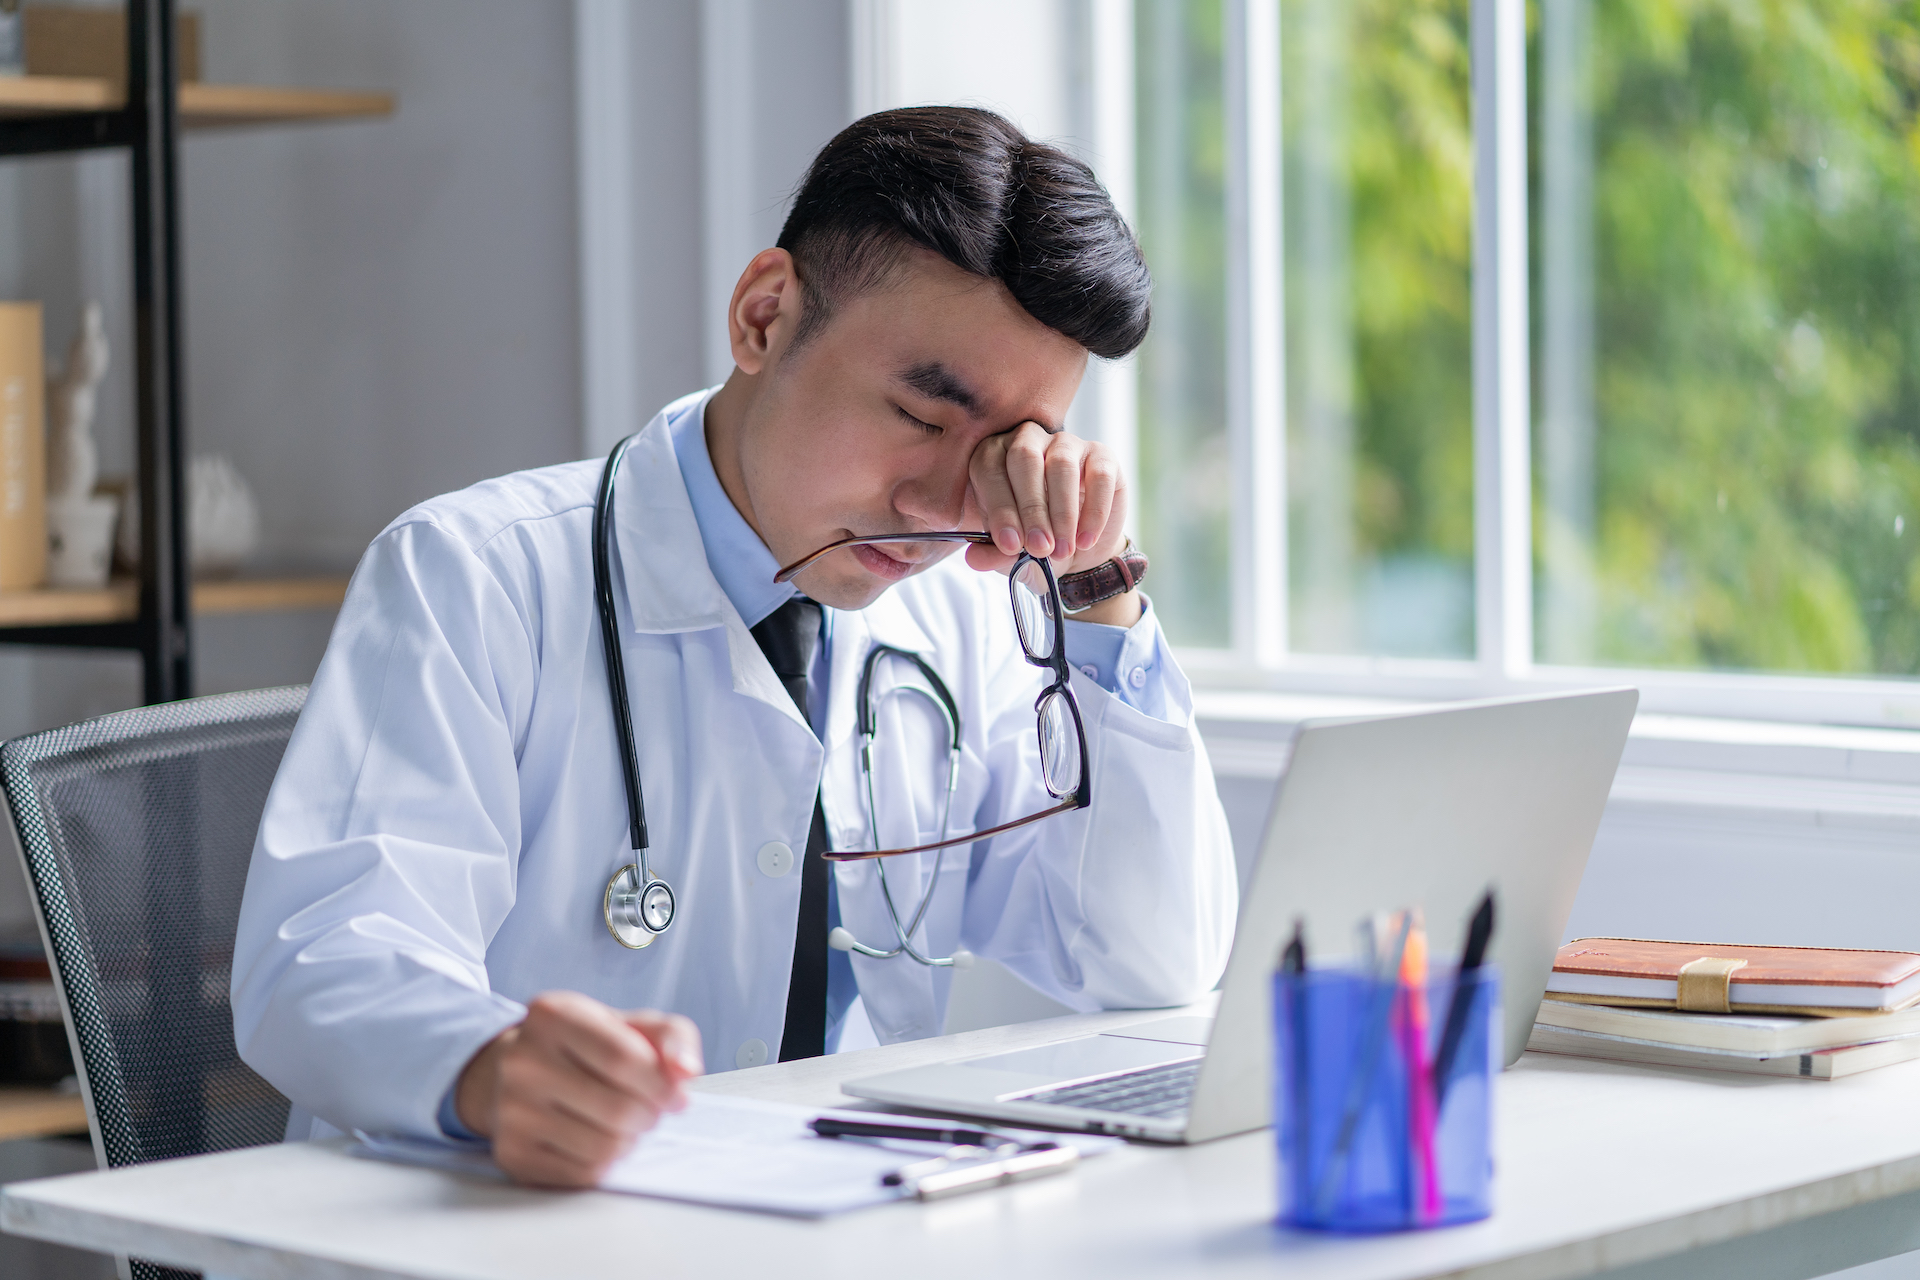 Attention, physicians and healthcare staff! 🩺 Struggling to find balance in your work and personal life? We've got the solution you've been waiting for. Discover how ONQ's QFamily contact center services can give you back precious time, reduce stress, and help you prioritize patient care.